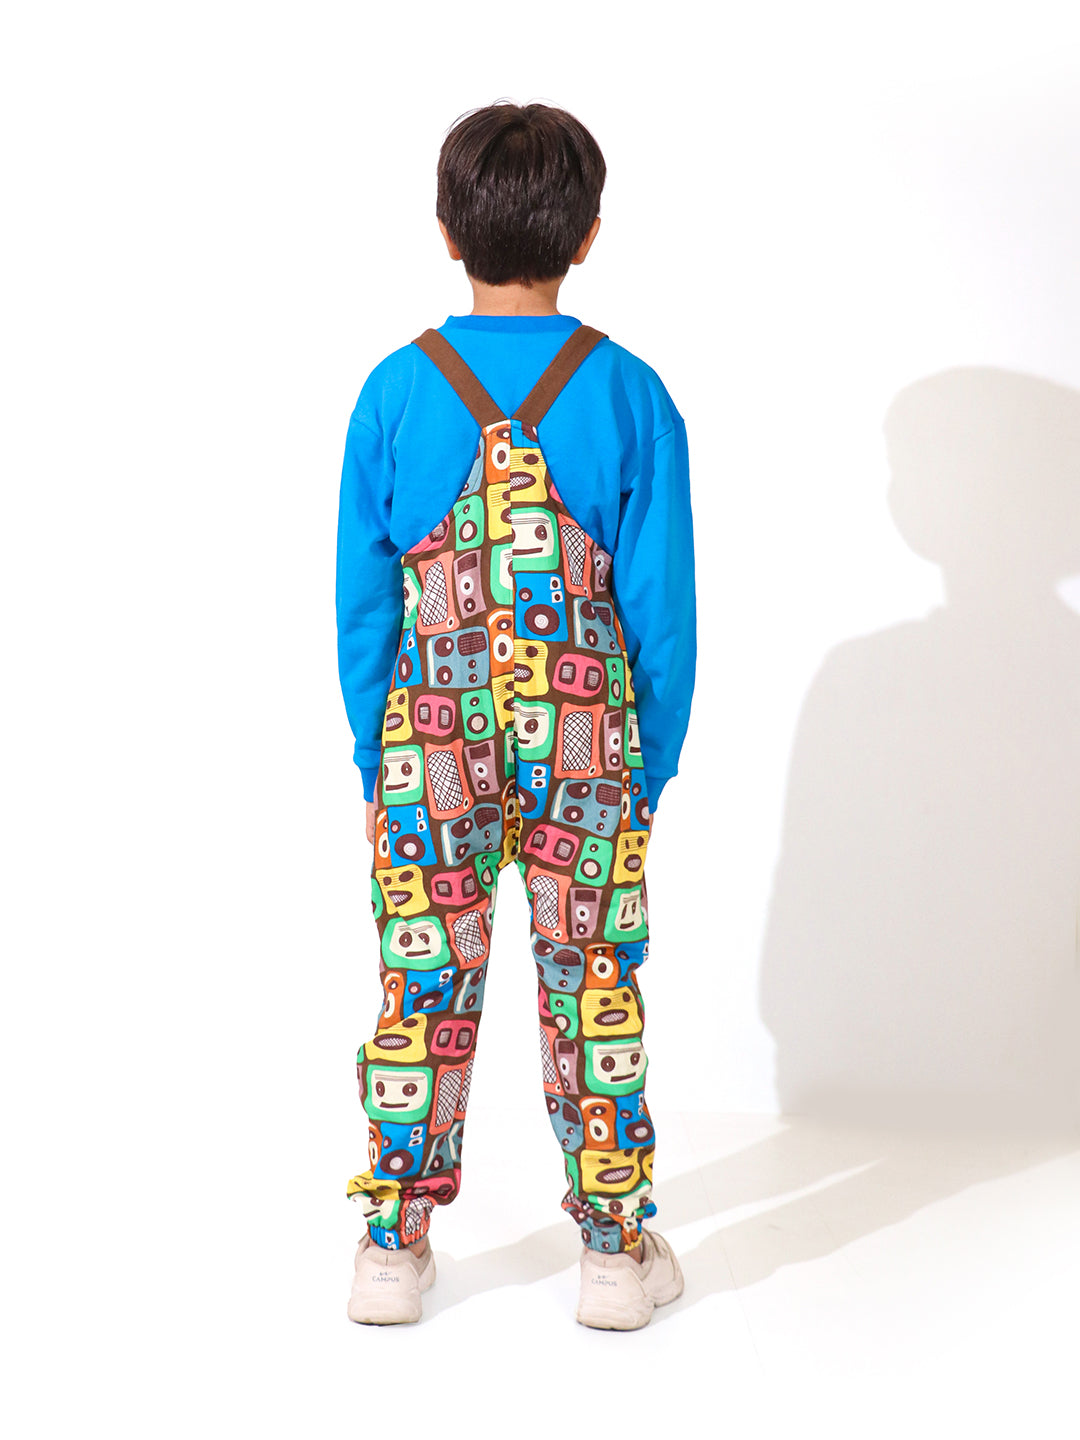 Whistle & Hops Retro Music Tape Dungaree with Blue Sweatshirt